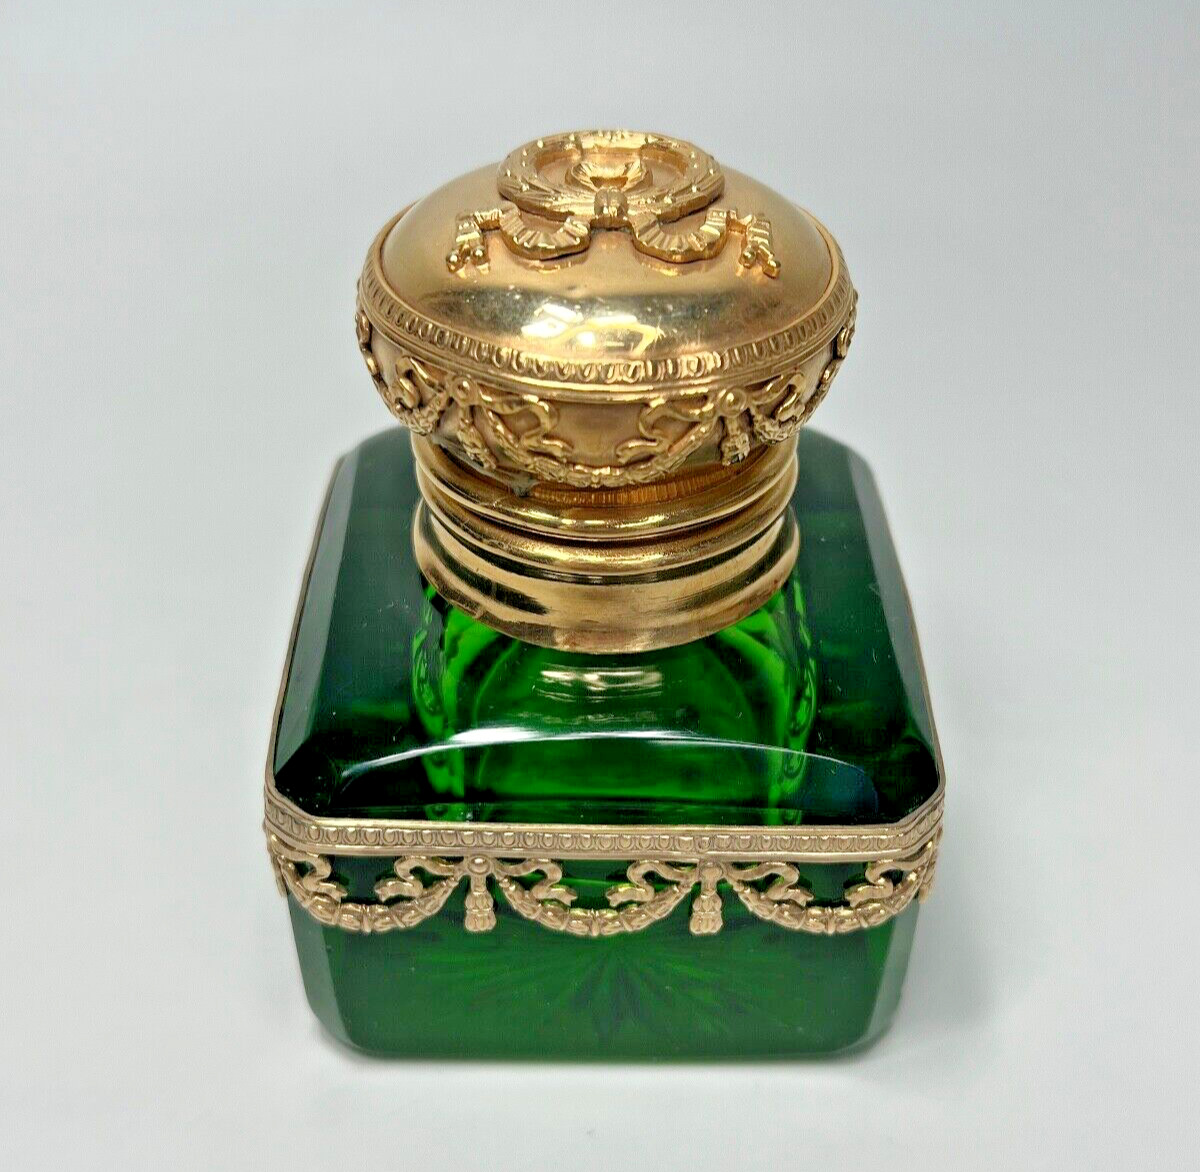 Antique Palais Royal Grand Tour French Empire Green Glass Ormolu Mounted Inkwell